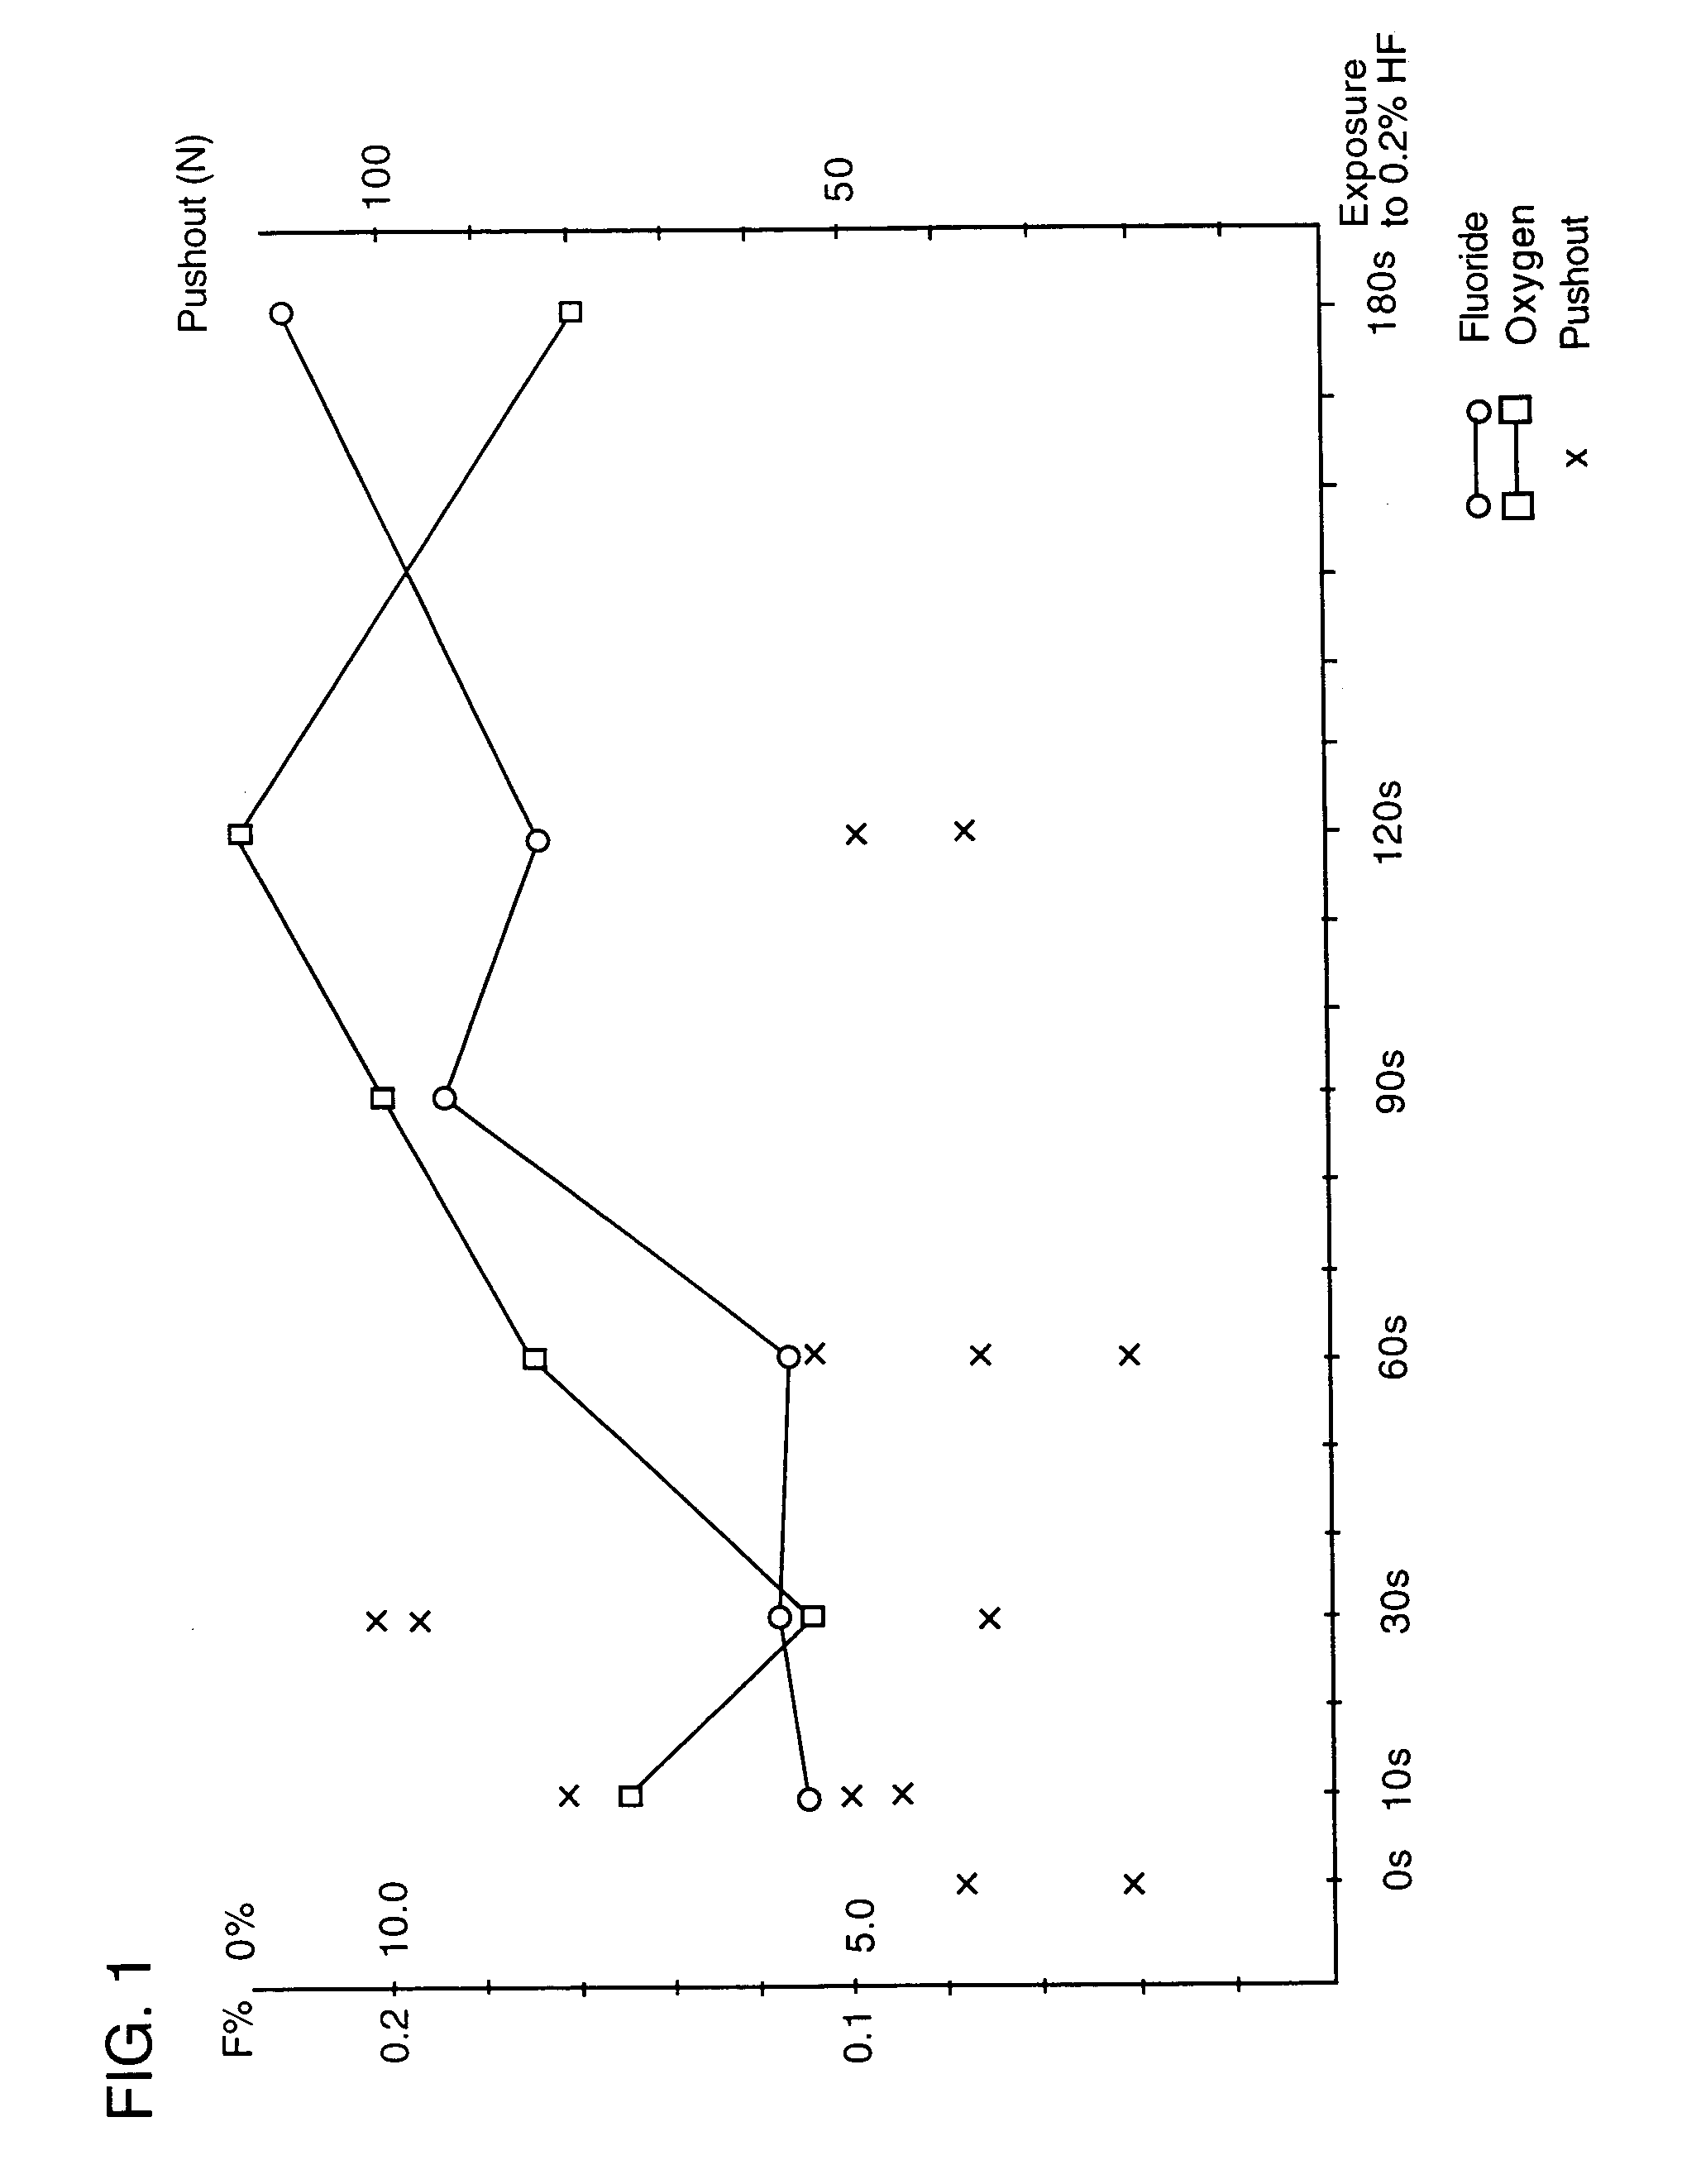 Metallic implant and process for treating a metallic implant